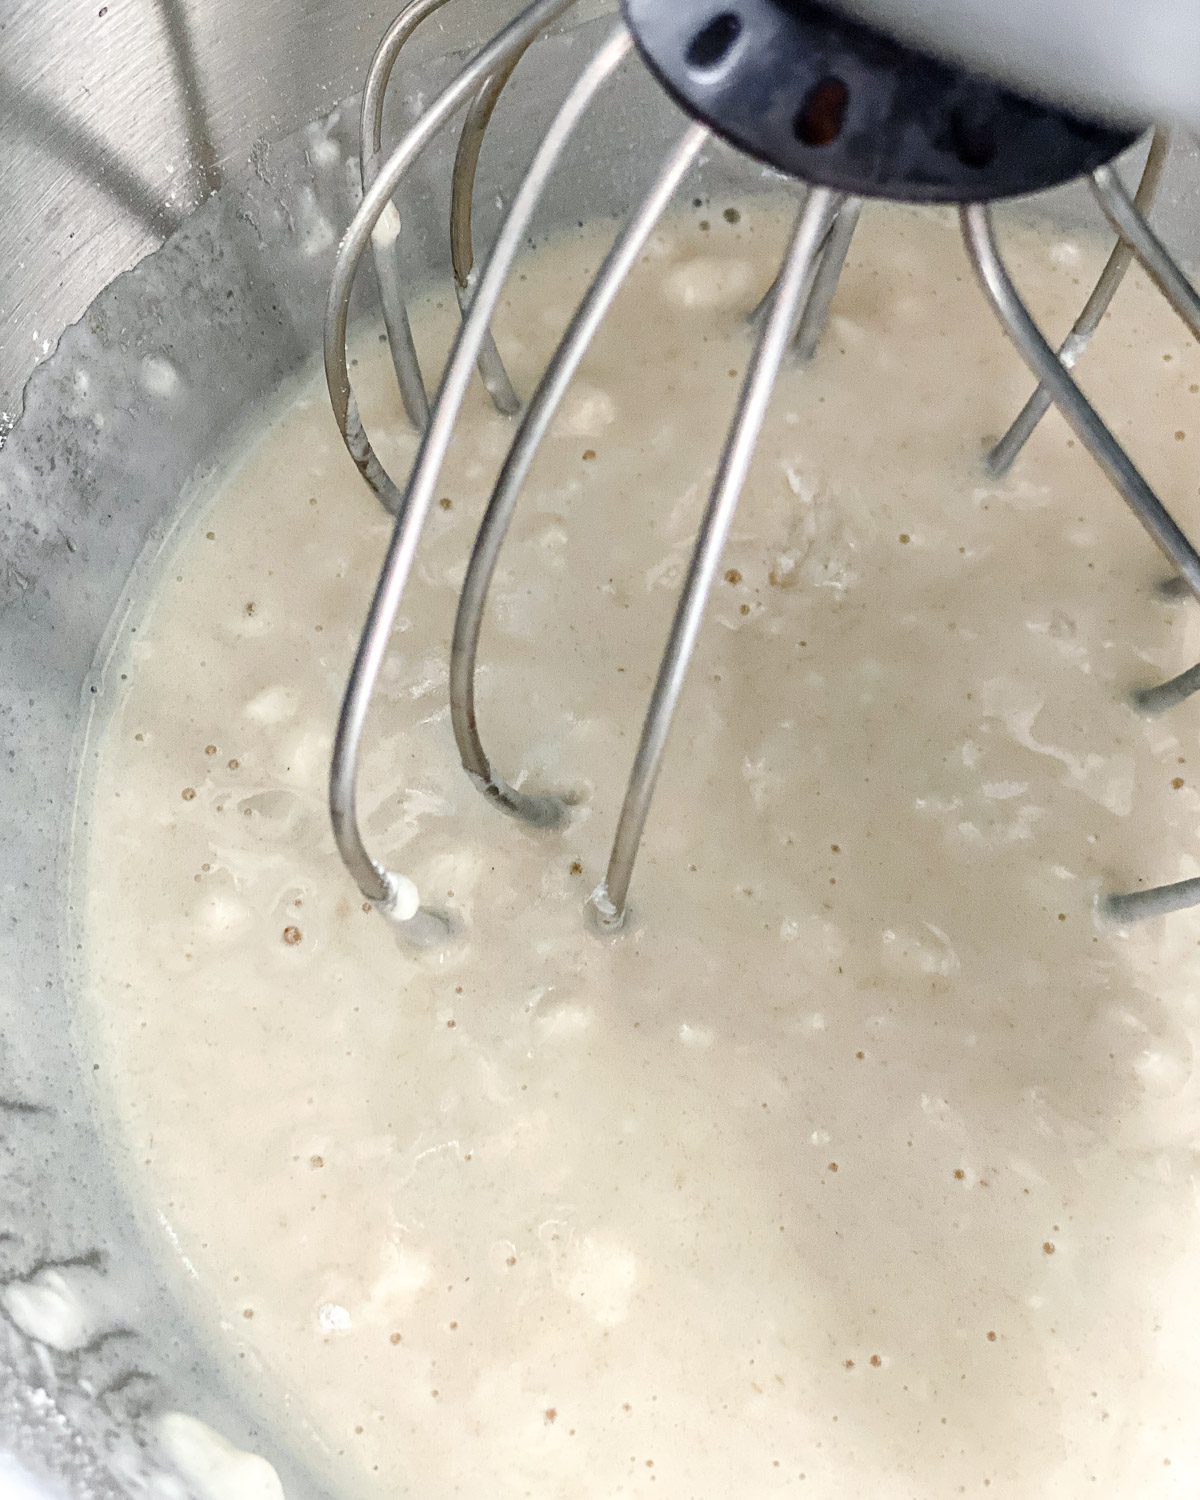 process of batter of Lemon Frosting Cake being mixed in mixing bowl